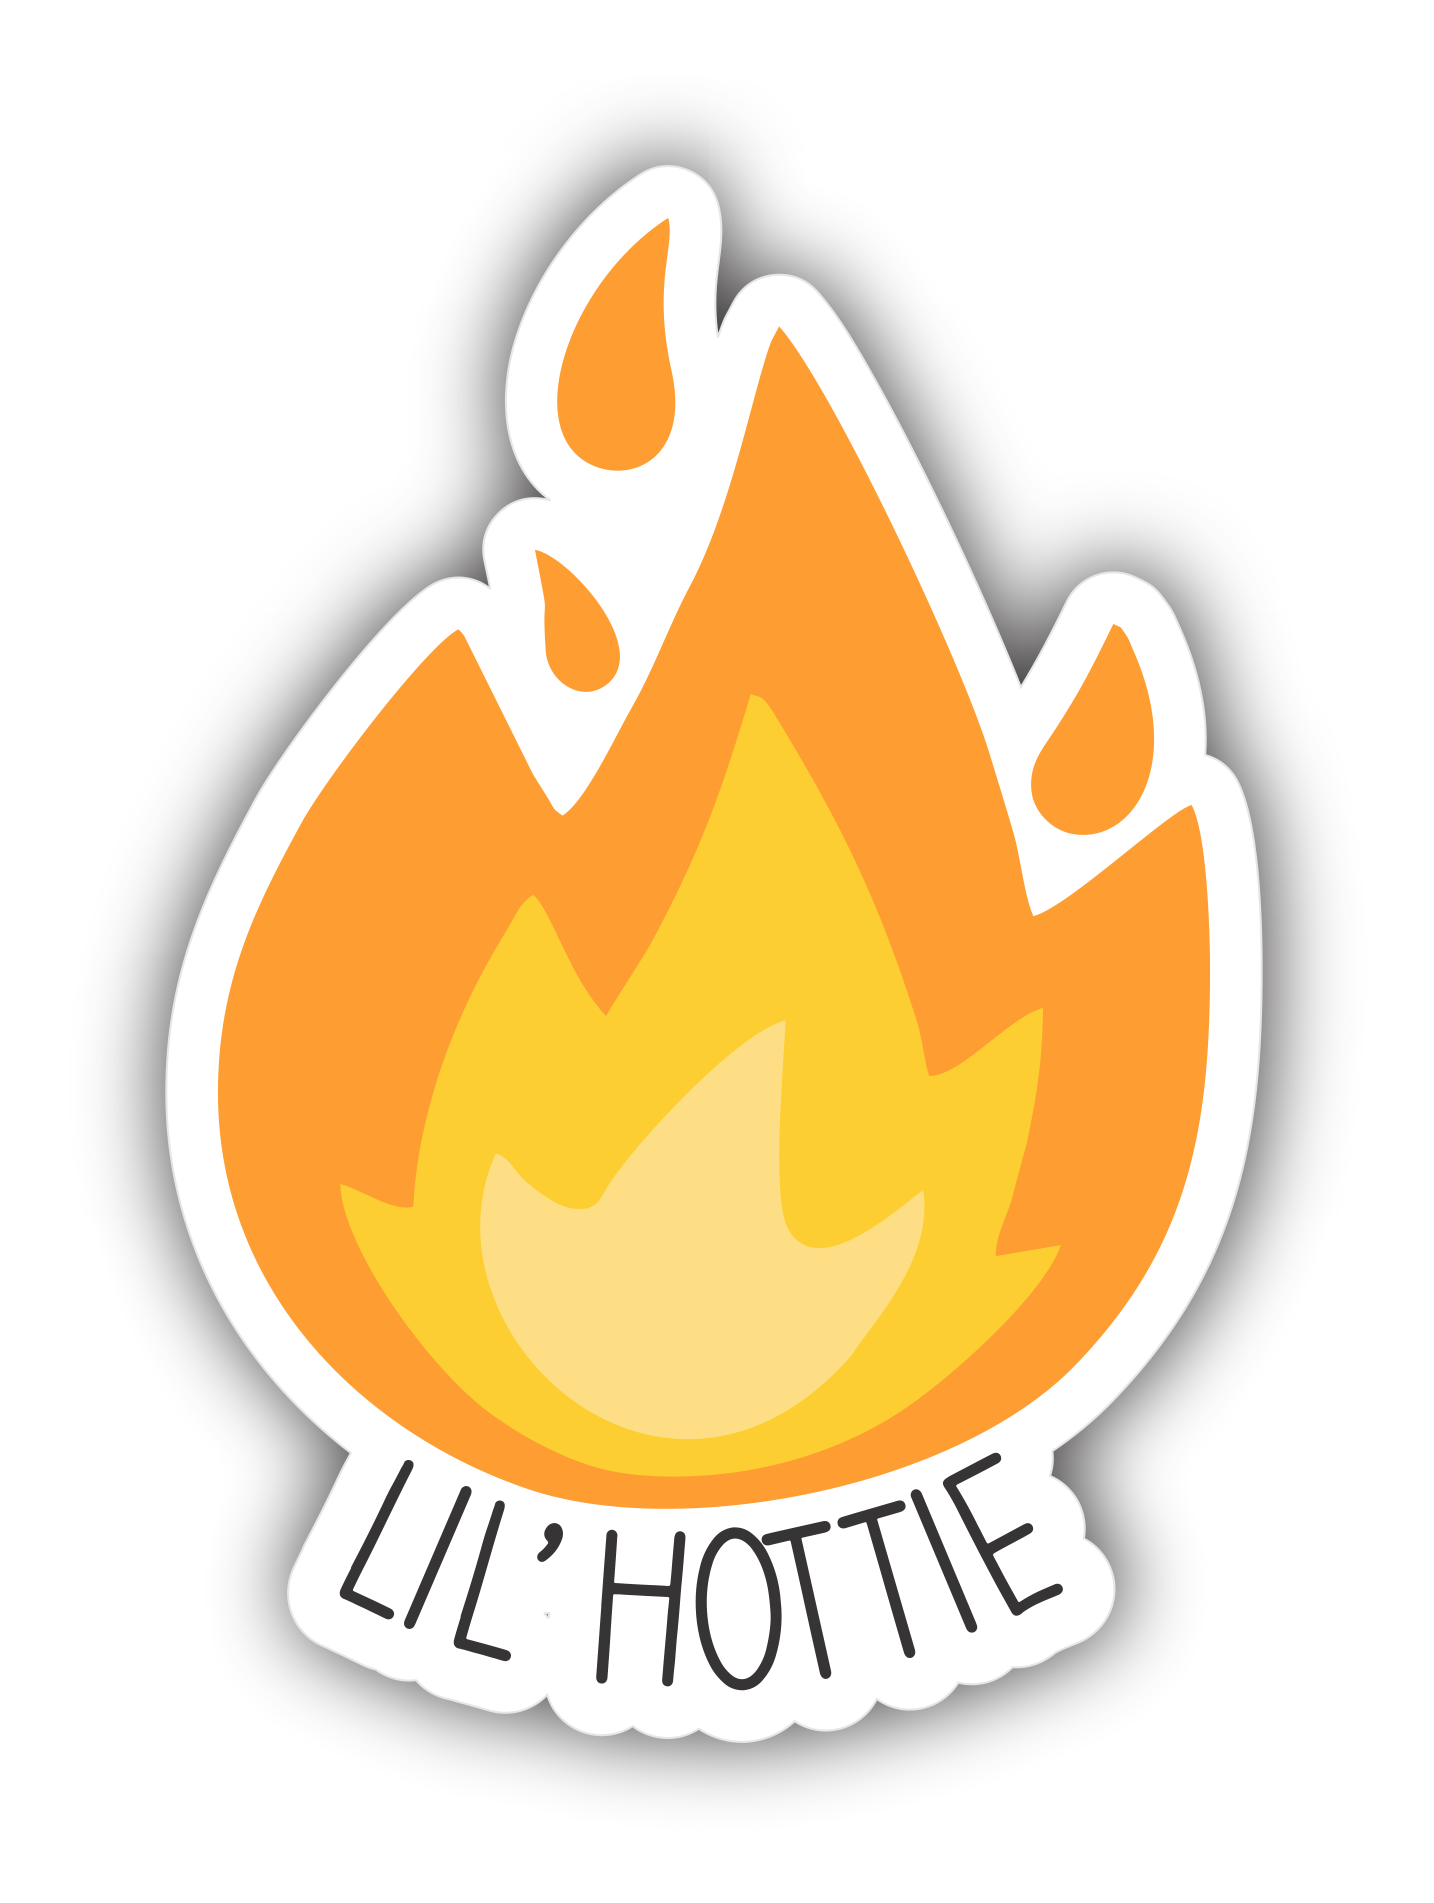 A sticker with a flame with the text lil' hottie underneath it